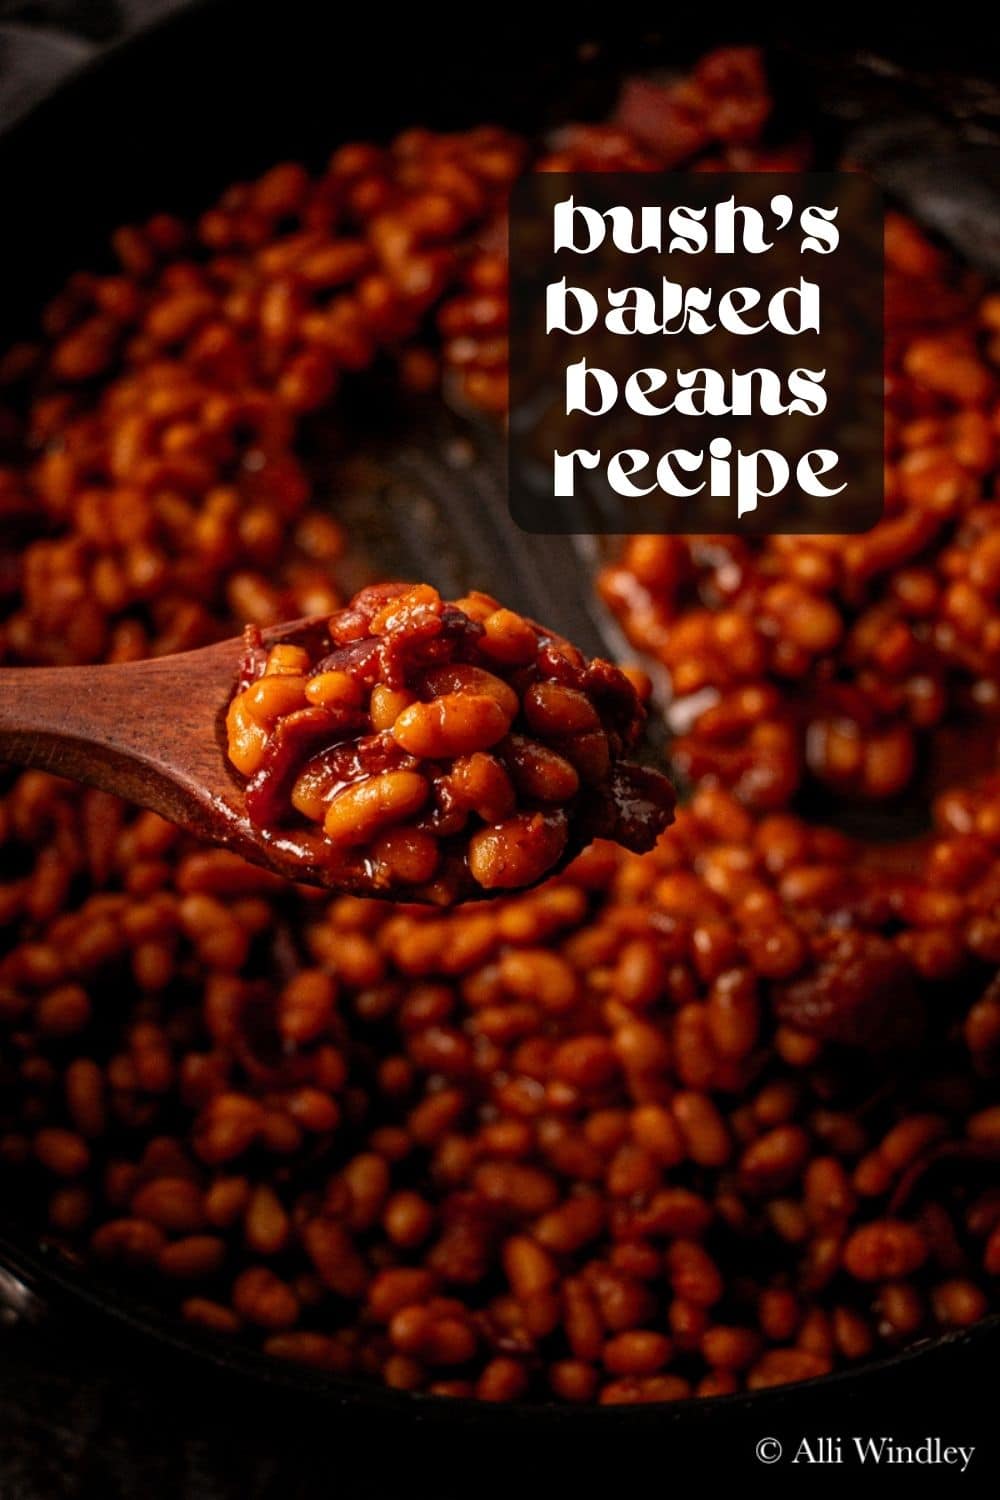 This copycat Bush's baked beans recipe uses simple ingredients and pantry staples! It's got that signature sweet and tangy flavor, just like the original. You'd never guess it's made completely from scratch!